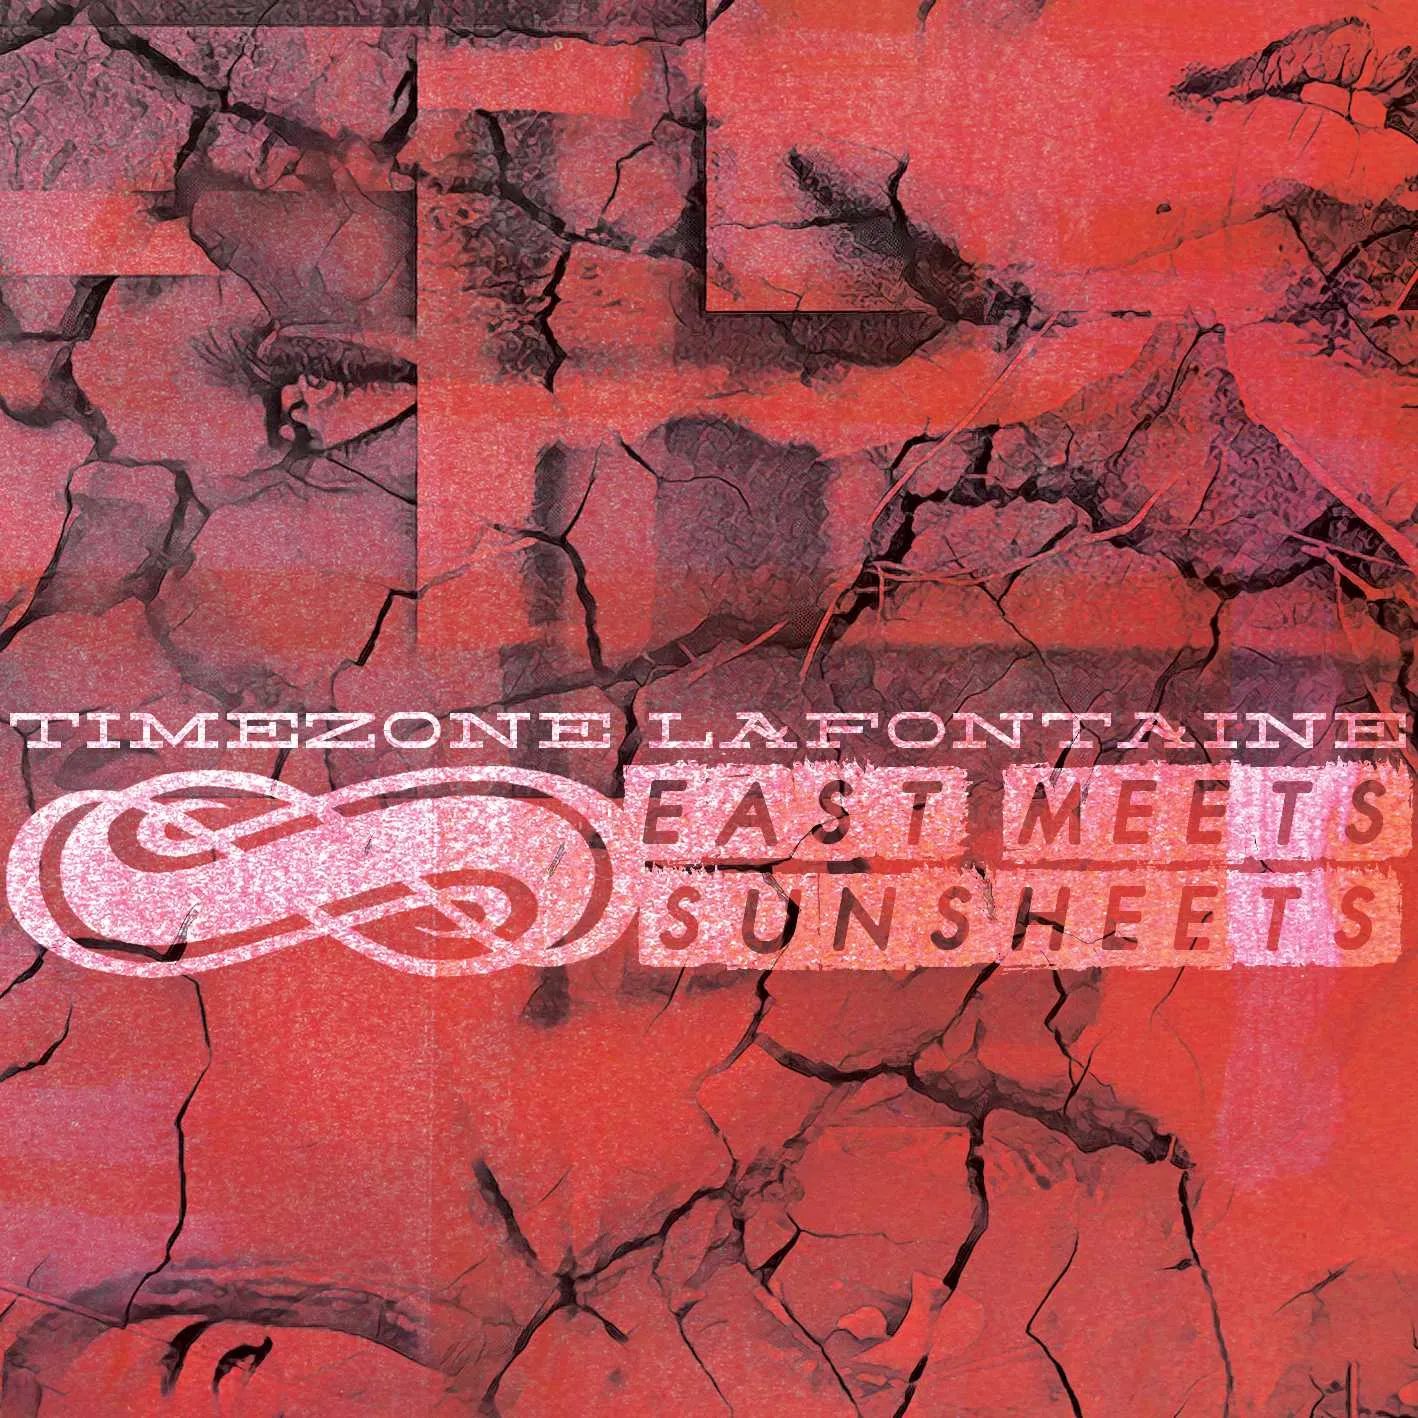 Album cover for “East Meets Sunsheets” by Timezone Lafontaine